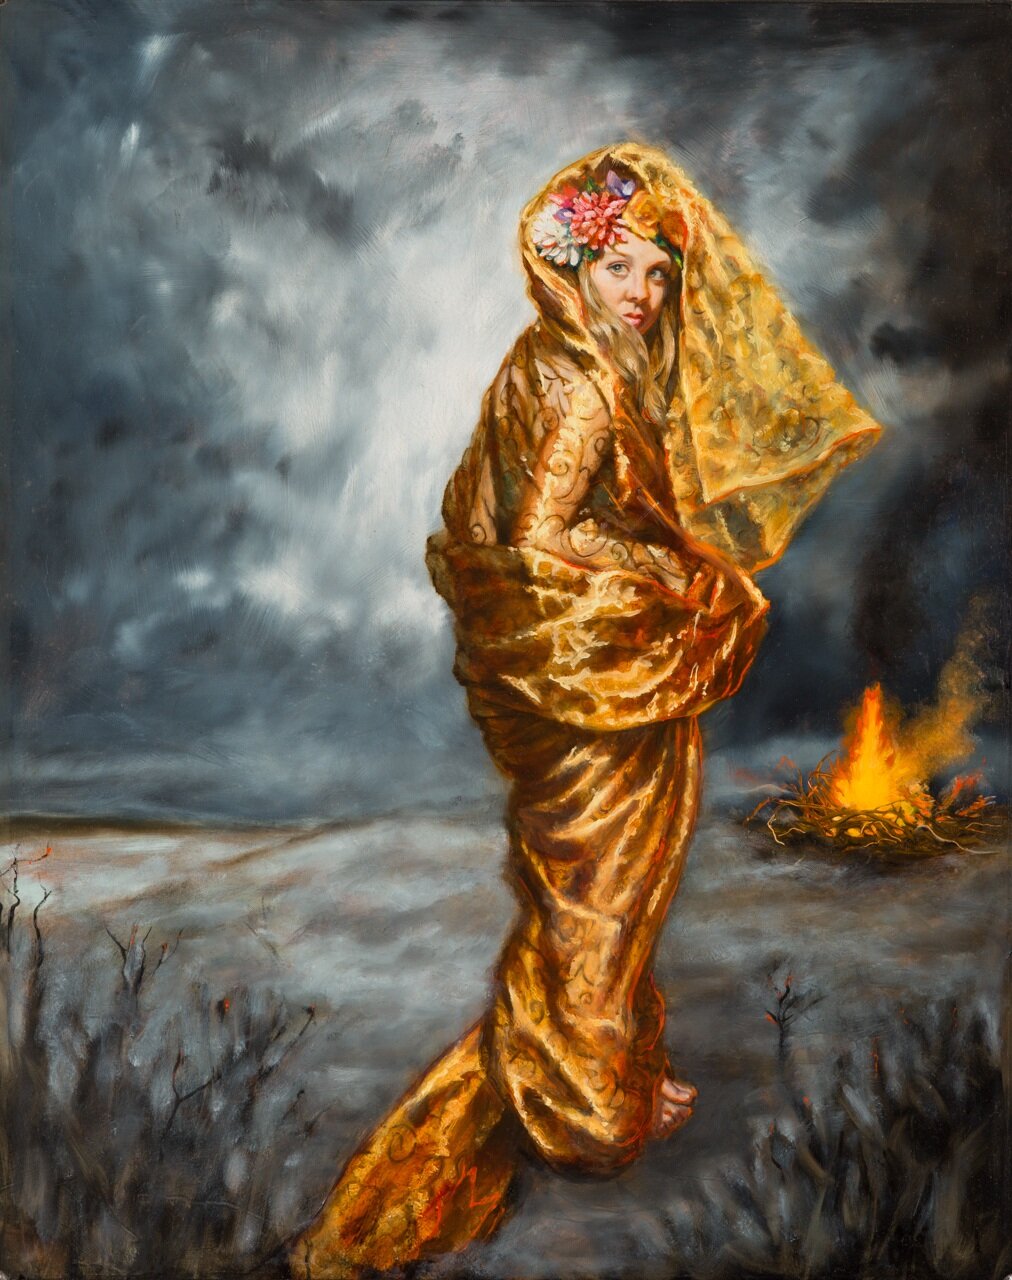    Becoming - oil on panel 20” x 16” Vintage Art nouveau frame    (SOLD) The Celtic Fire Goddess, Breo-Saighit or Brighid who was later St Brighid to the Christians. She was the Flame of Ireland. Legend says that when She was born, a tower of flame r